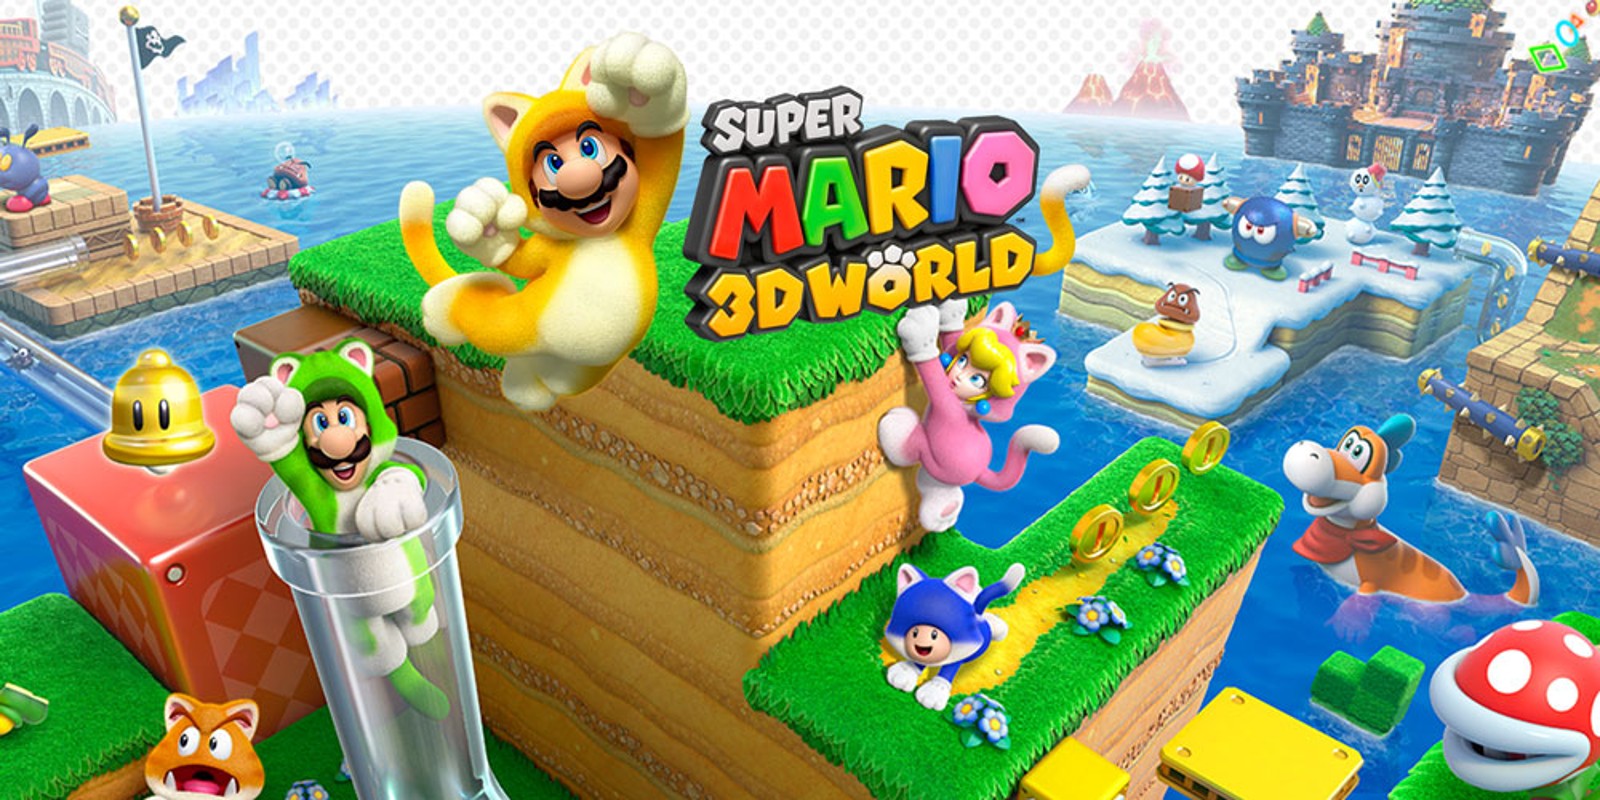 How to Use Amiibo in Super Mario 3D World